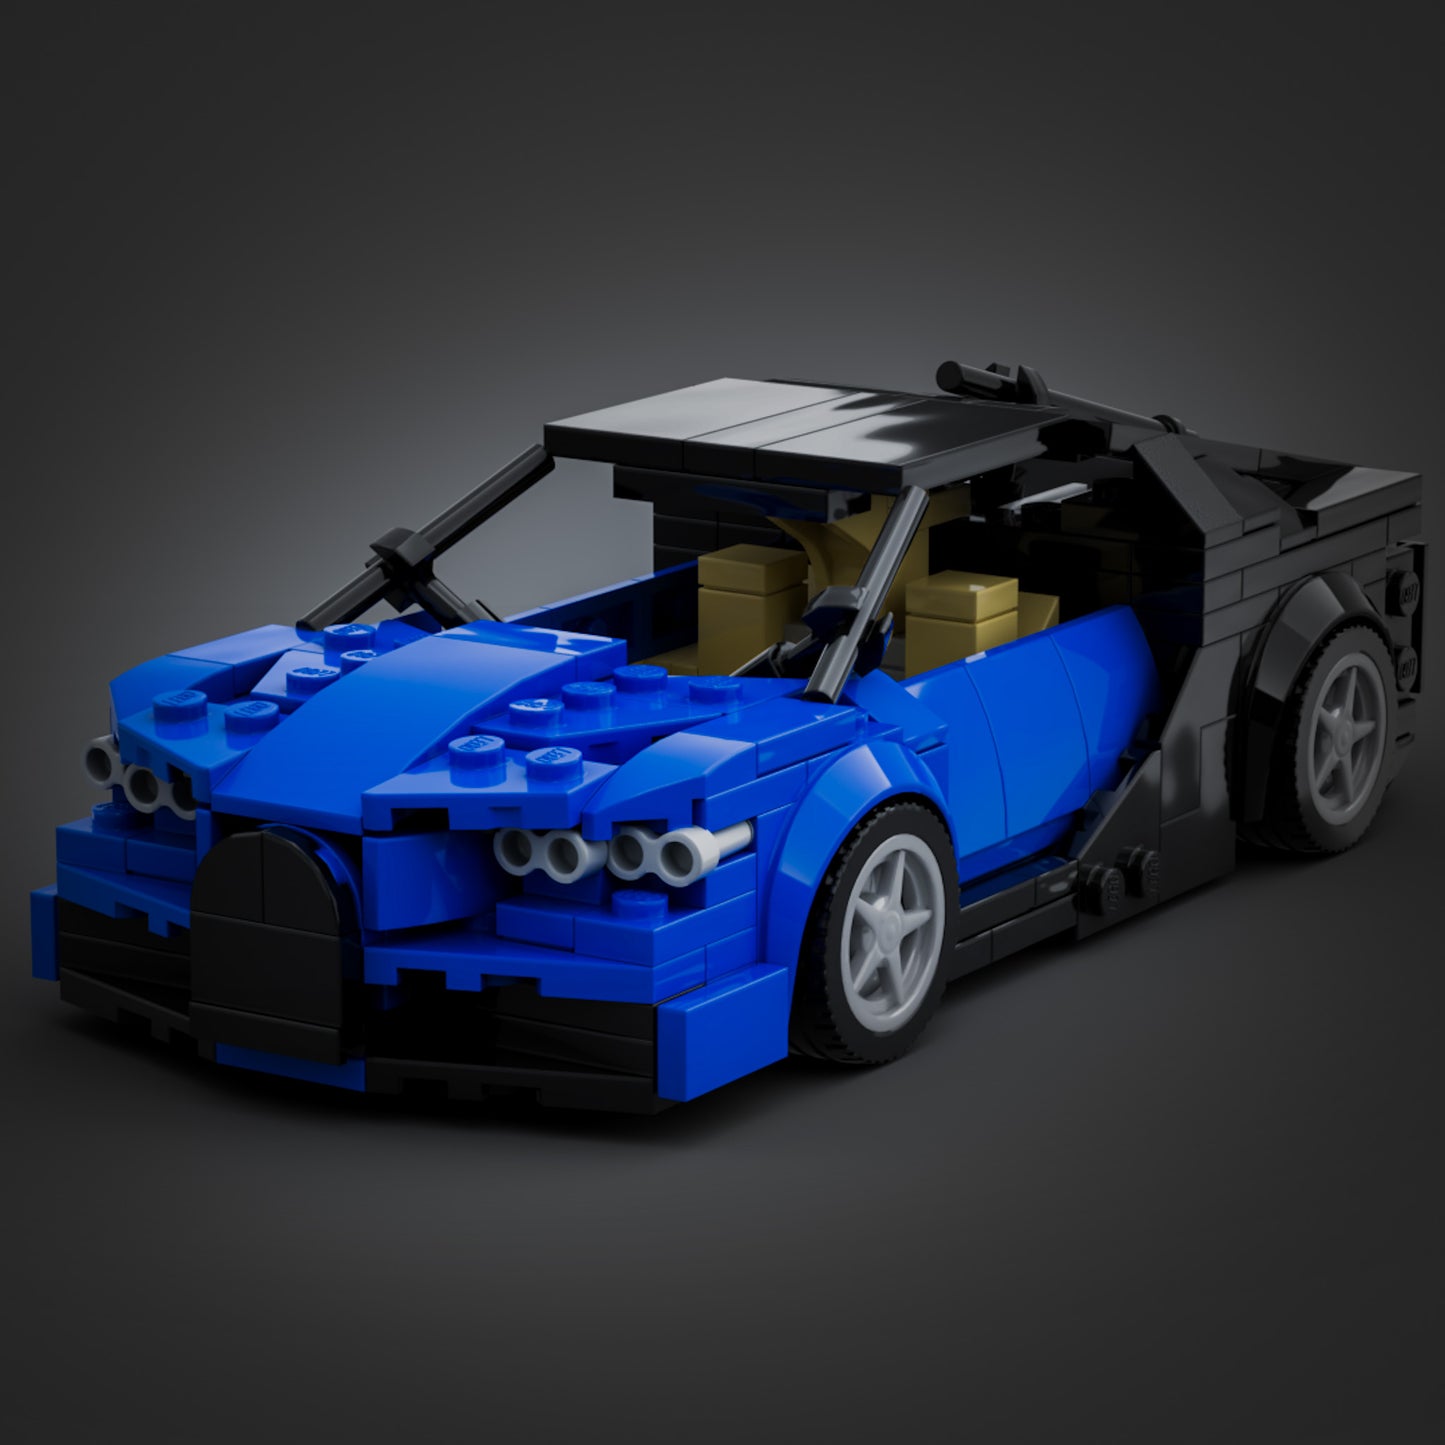 Inspired by Bugatti Chiron - Blue & Black (instructions)